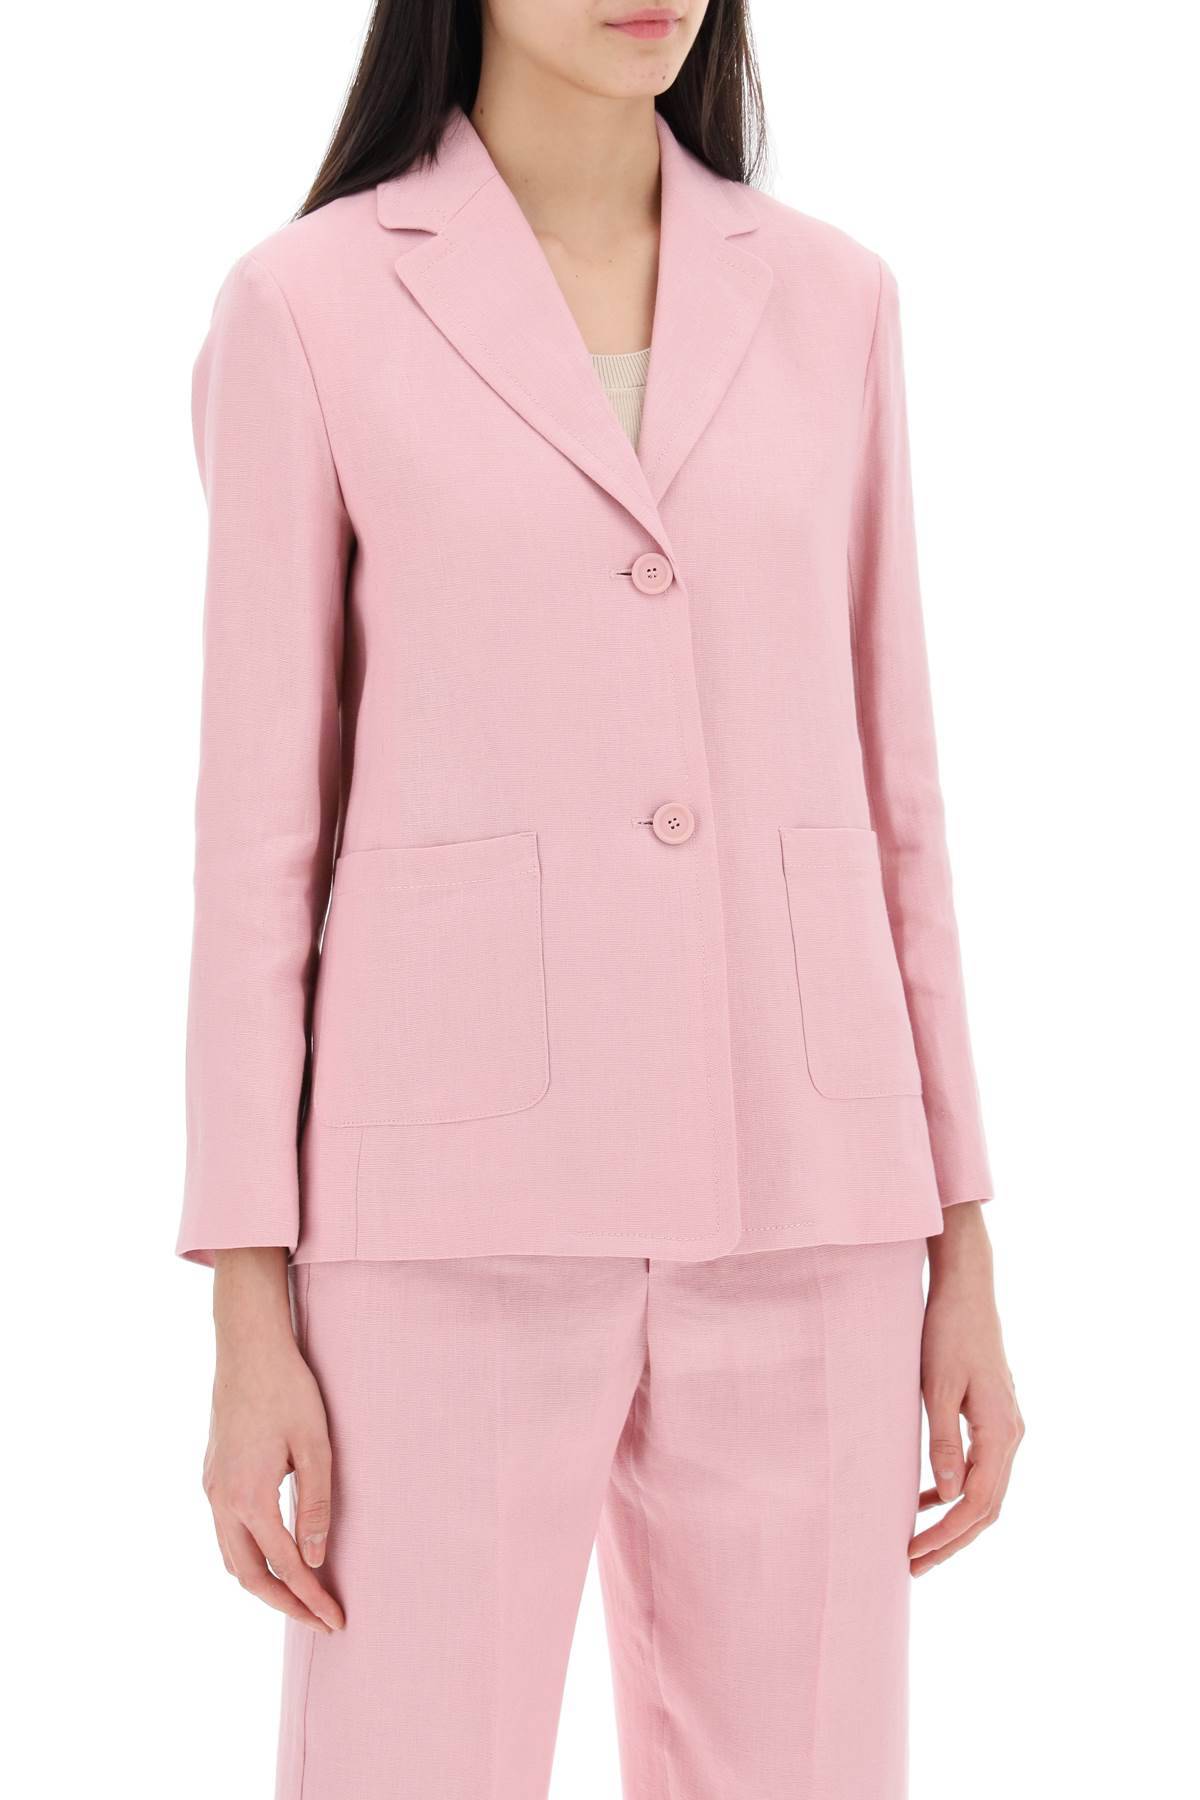 Shop 's Max Mara Socrates Single-breasted In Pink